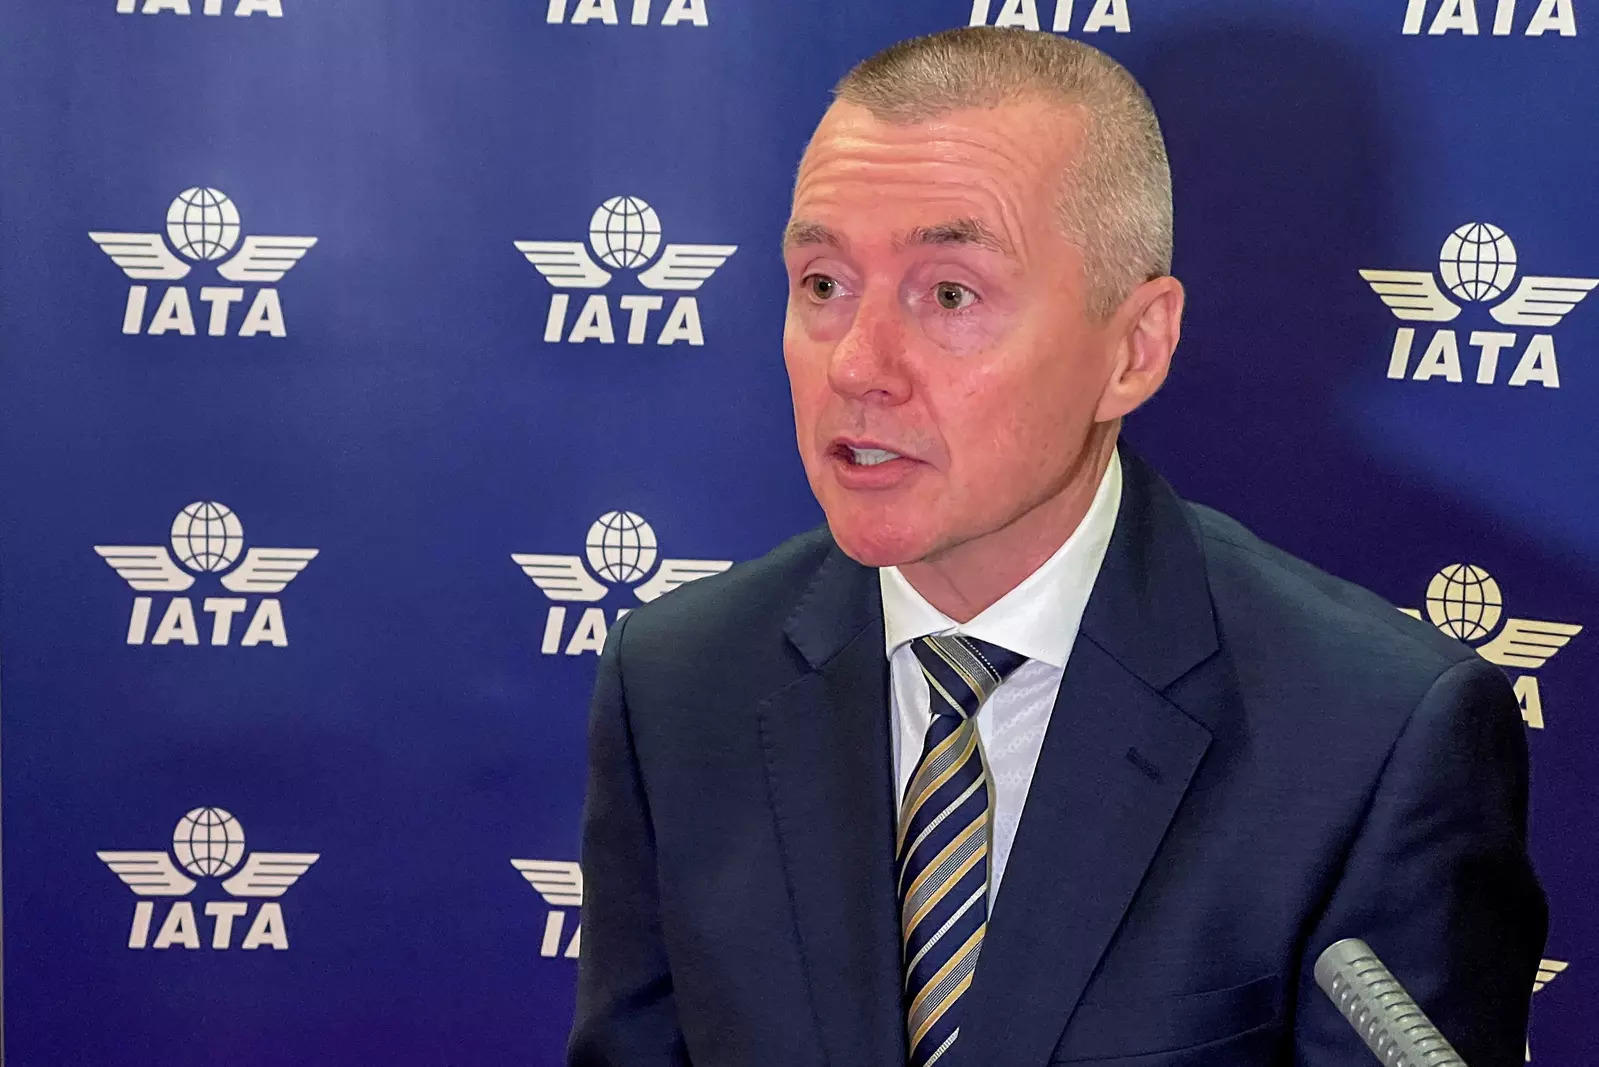 Still looking at global recovery in 2024, with good progress being made in 2022 & 2023: IATA DG